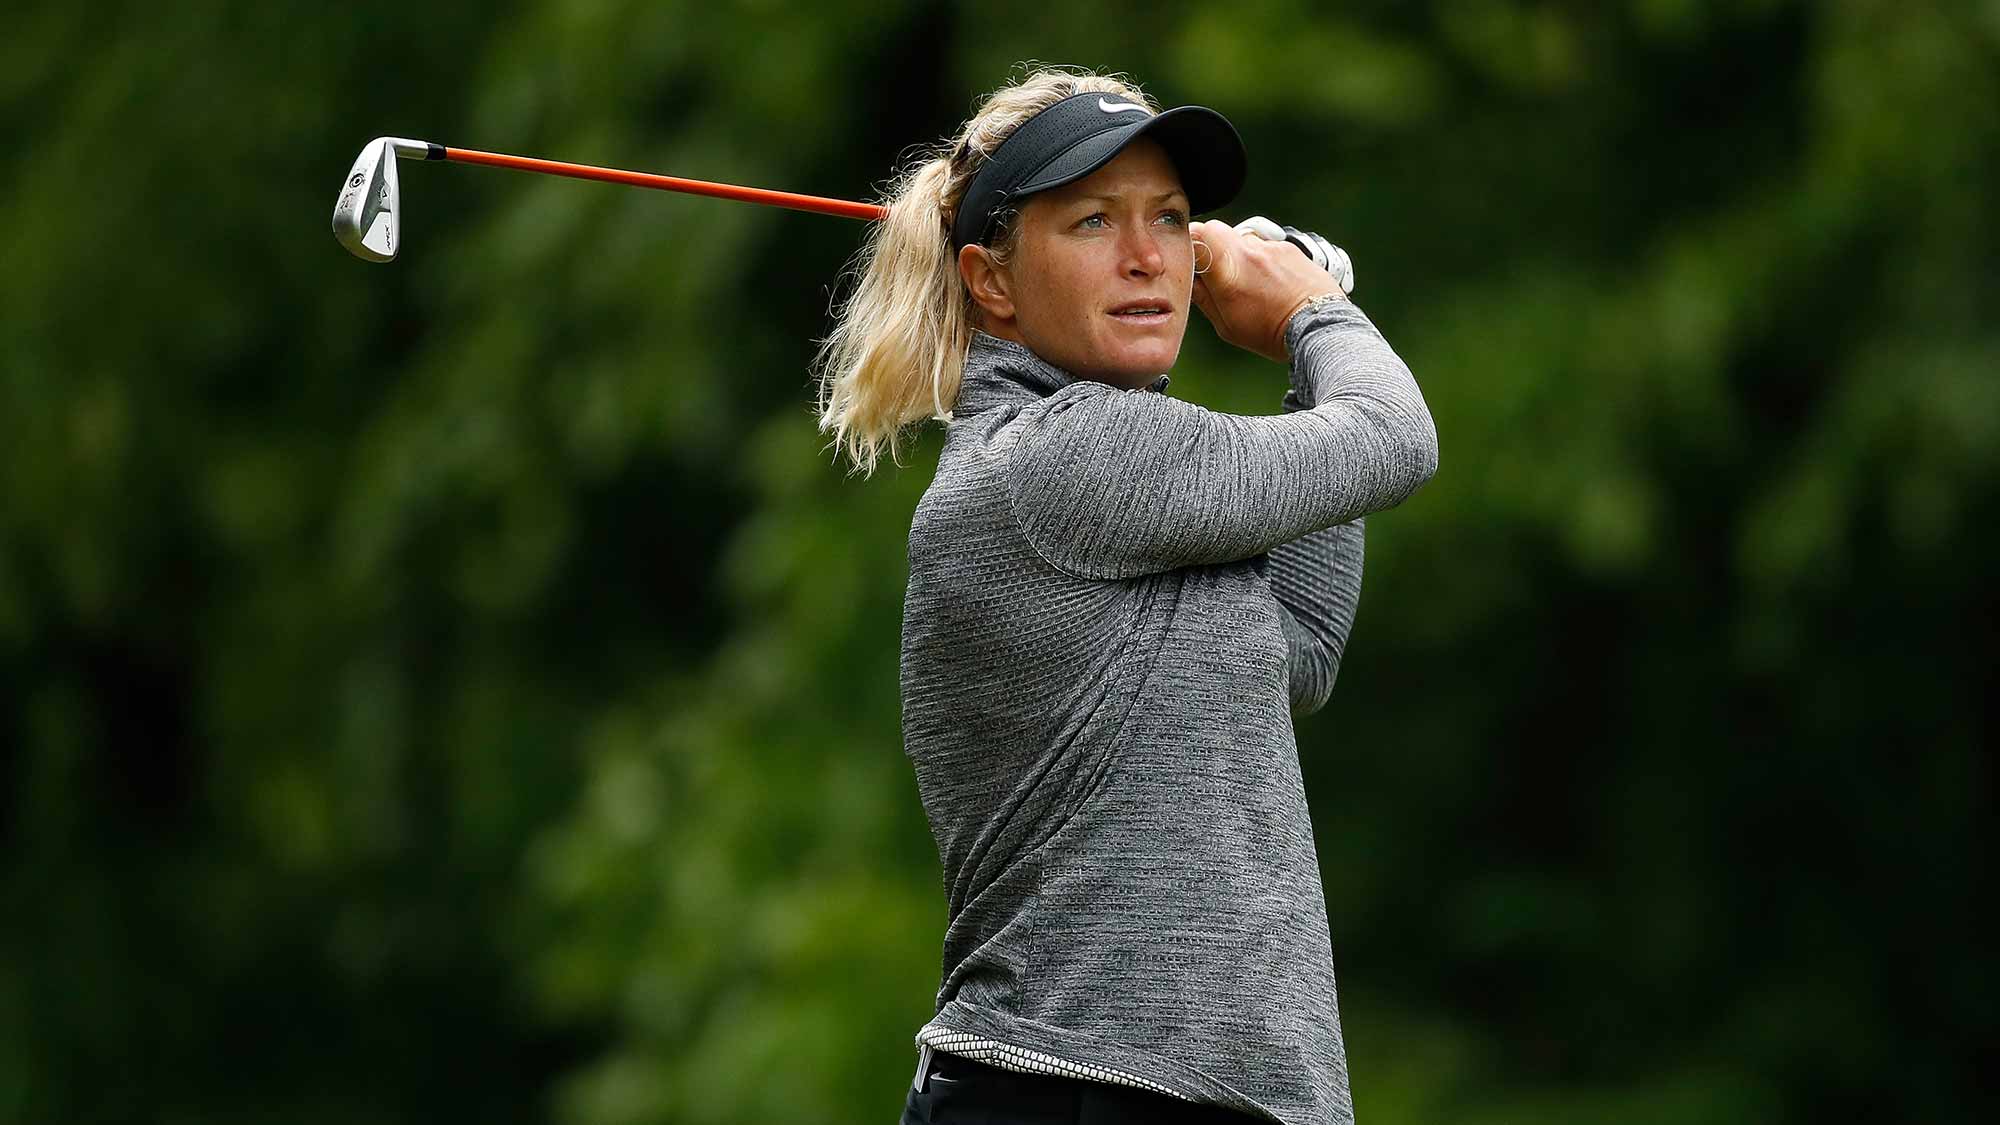 Suzann Pettersen of Norway watches her drive on the seventh hole during the first round of the LPGA Volvik Championship on May 25, 2017 at Travis Pointe Country Club Ann Arbor, Michigan